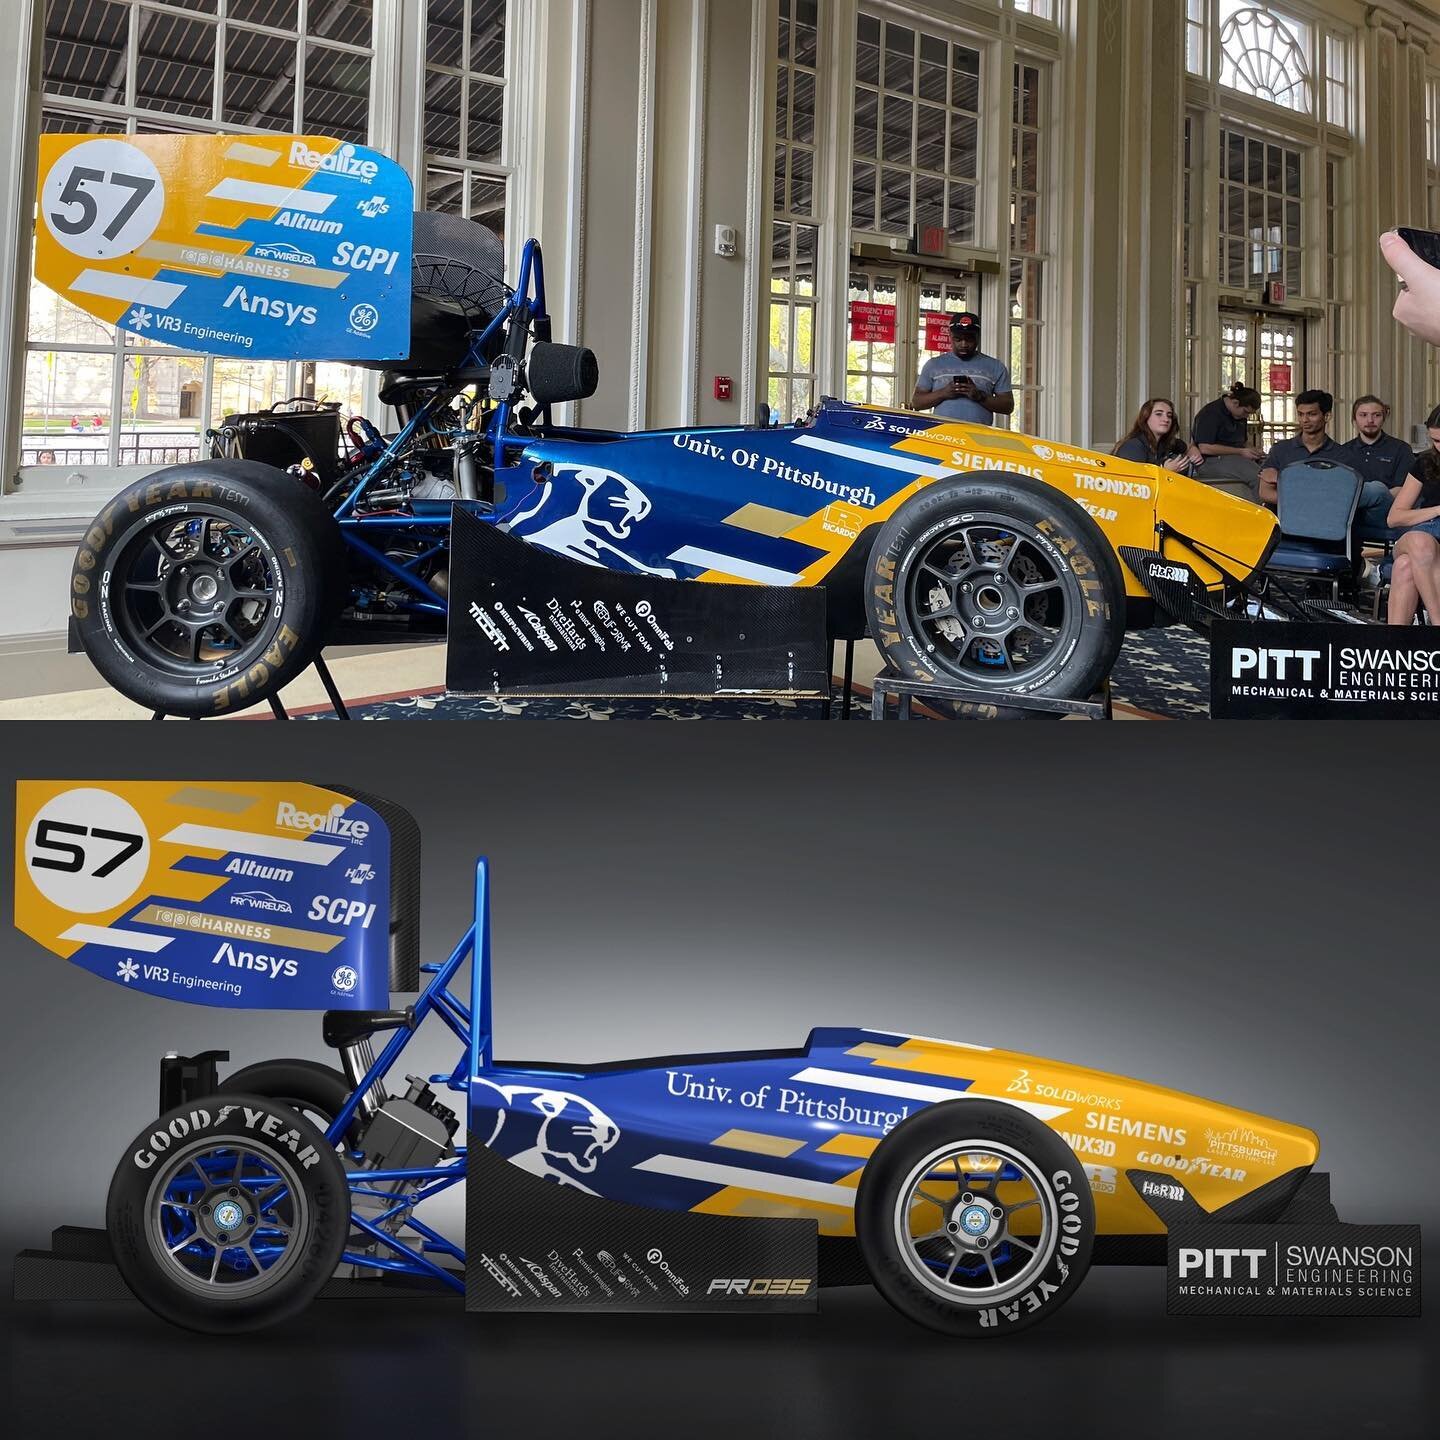 Time for something a bit different&hellip; Congrats to @pittfsae on rollout of their new #FSAE spec (a competition of university built formula cars) &ldquo;#PR035&rdquo;. 

We worked with the team to develop a livery and assist with installation tech